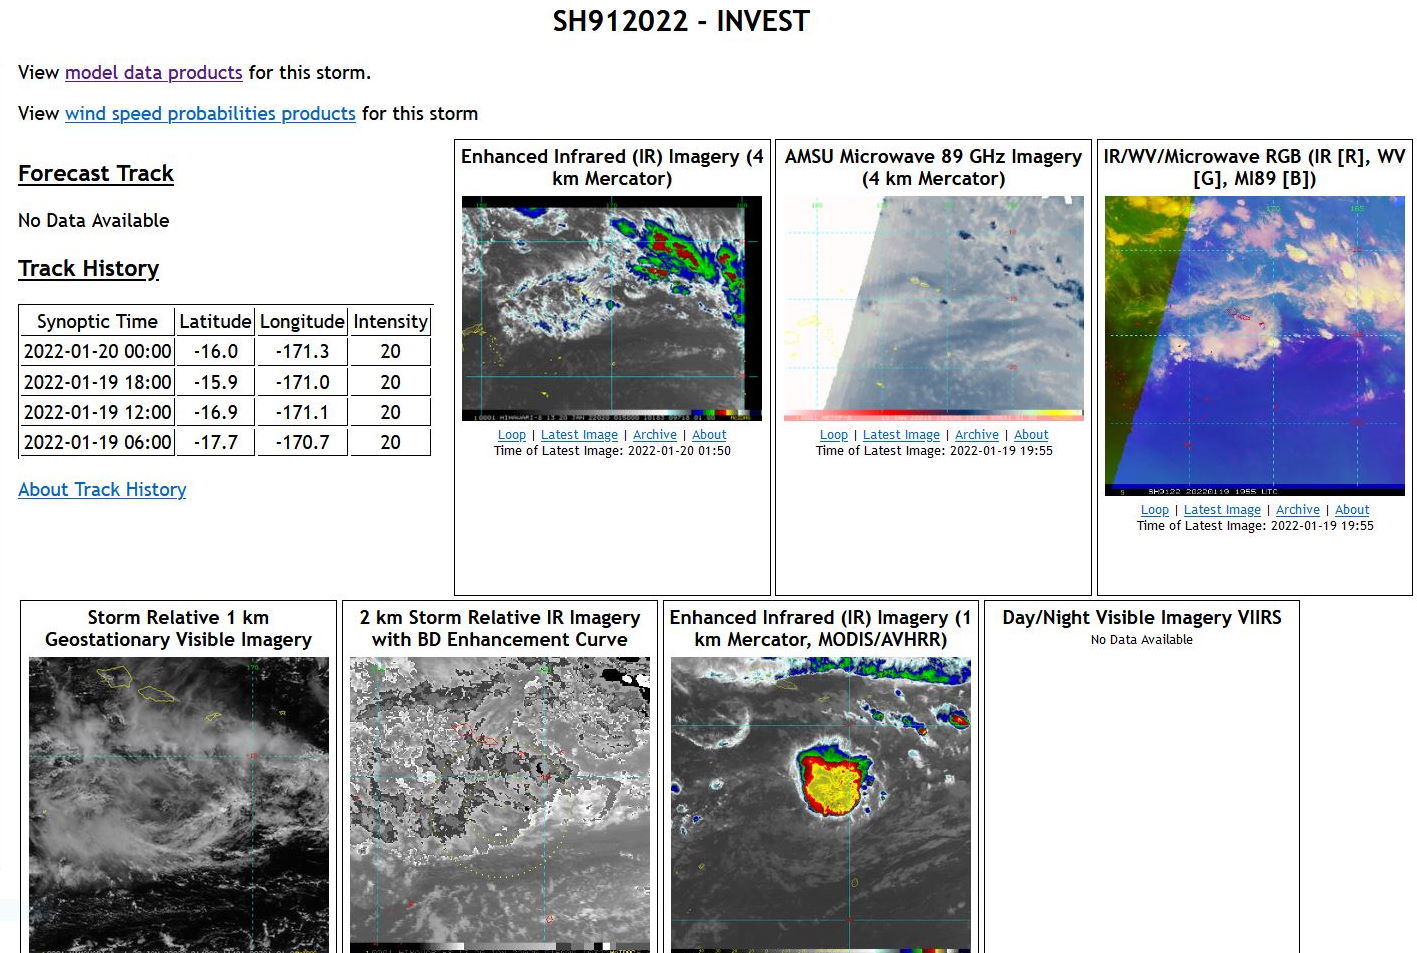 THE AREA OF CONVECTION (INVEST 91P) PREVIOUSLY LOCATED  NEAR 17.9S 170.6W IS NOW LOCATED NEAR 15.4S 172.0W, APPROXIMATELY  190 KM SOUTHWEST OF PAGO PAGO, AMERICAN SAMOA. ANIMATED ENHANCED  INFRARED SATELLITE IMAGERY AND A SSMIS 91GHZ PASS SHOW SOME  FLARING CONVECTION IN THE EASTERN AND WESTER PERIPHERY OF AN EXPOSED  LOW LEVEL CIRCULATION. ENVIRONMENTAL ANALYSIS INDICATES MARGINALLY  FAVORABLE CONDITIONS FOR DEVELOPMENT DEFINED BY LOW TO MODERATE (10- 15KT) VERTICAL WIND SHEAR AND WARM (29-30C) SEA SURFACE  TEMPERATURES, OFFSET BY WEAK OUTFLOW ALOFT. GLOBAL MODELS ARE IN  GOOD AGREEMENT THAT 91P WILL CONTINUE ALONG ITS NORTH-NORTHWESTWARD  TRACK OVER THE NEXT 24-48 HOURS.  MAXIMUM SUSTAINED SURFACE WINDS  ARE ESTIMATED AT 20 TO 25 KNOTS. MINIMUM SEA LEVEL PRESSURE IS  ESTIMATED TO BE NEAR 1001 MB. THE POTENTIAL FOR THE DEVELOPMENT OF A  SIGNIFICANT TROPICAL CYCLONE WITHIN THE NEXT 24 HOURS REMAINS LOW.